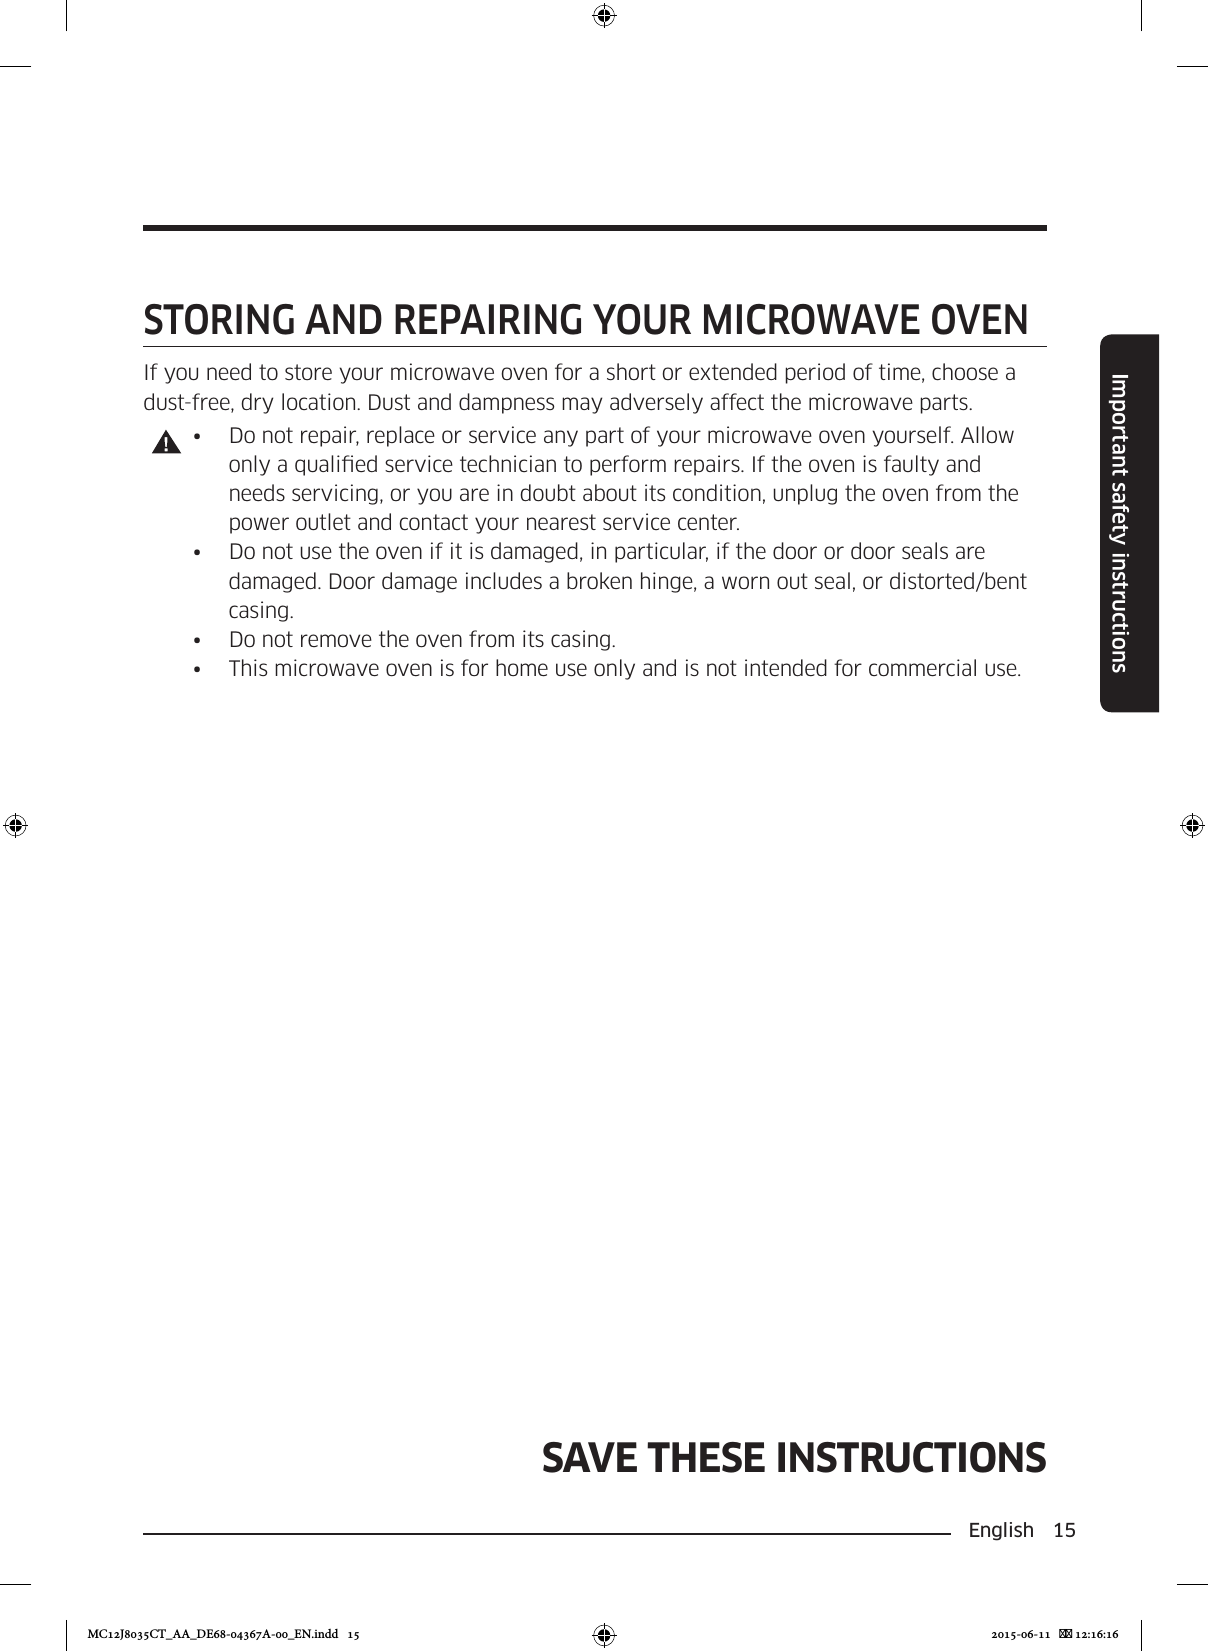 English 15Important safety instructionsSAVE THESE INSTRUCTIONSSTORING AND REPAIRING YOUR MICROWAVE OVENIf you need to store your microwave oven for a short or extended period of time, choose a dust-free, dry location. Dust and dampness may adversely affect the microwave parts.•  Do not repair, replace or service any part of your microwave oven yourself. Allow only a qualied service technician to perform repairs. If the oven is faulty and needs servicing, or you are in doubt about its condition, unplug the oven from the power outlet and contact your nearest service center.•  Do not use the oven if it is damaged, in particular, if the door or door seals are damaged. Door damage includes a broken hinge, a worn out seal, or distorted/bent casing.•  Do not remove the oven from its casing.•  This microwave oven is for home use only and is not intended for commercial use.MC12J8035CT_AA_DE68-04367A-00_EN.indd   15 2015-06-11    12:16:16